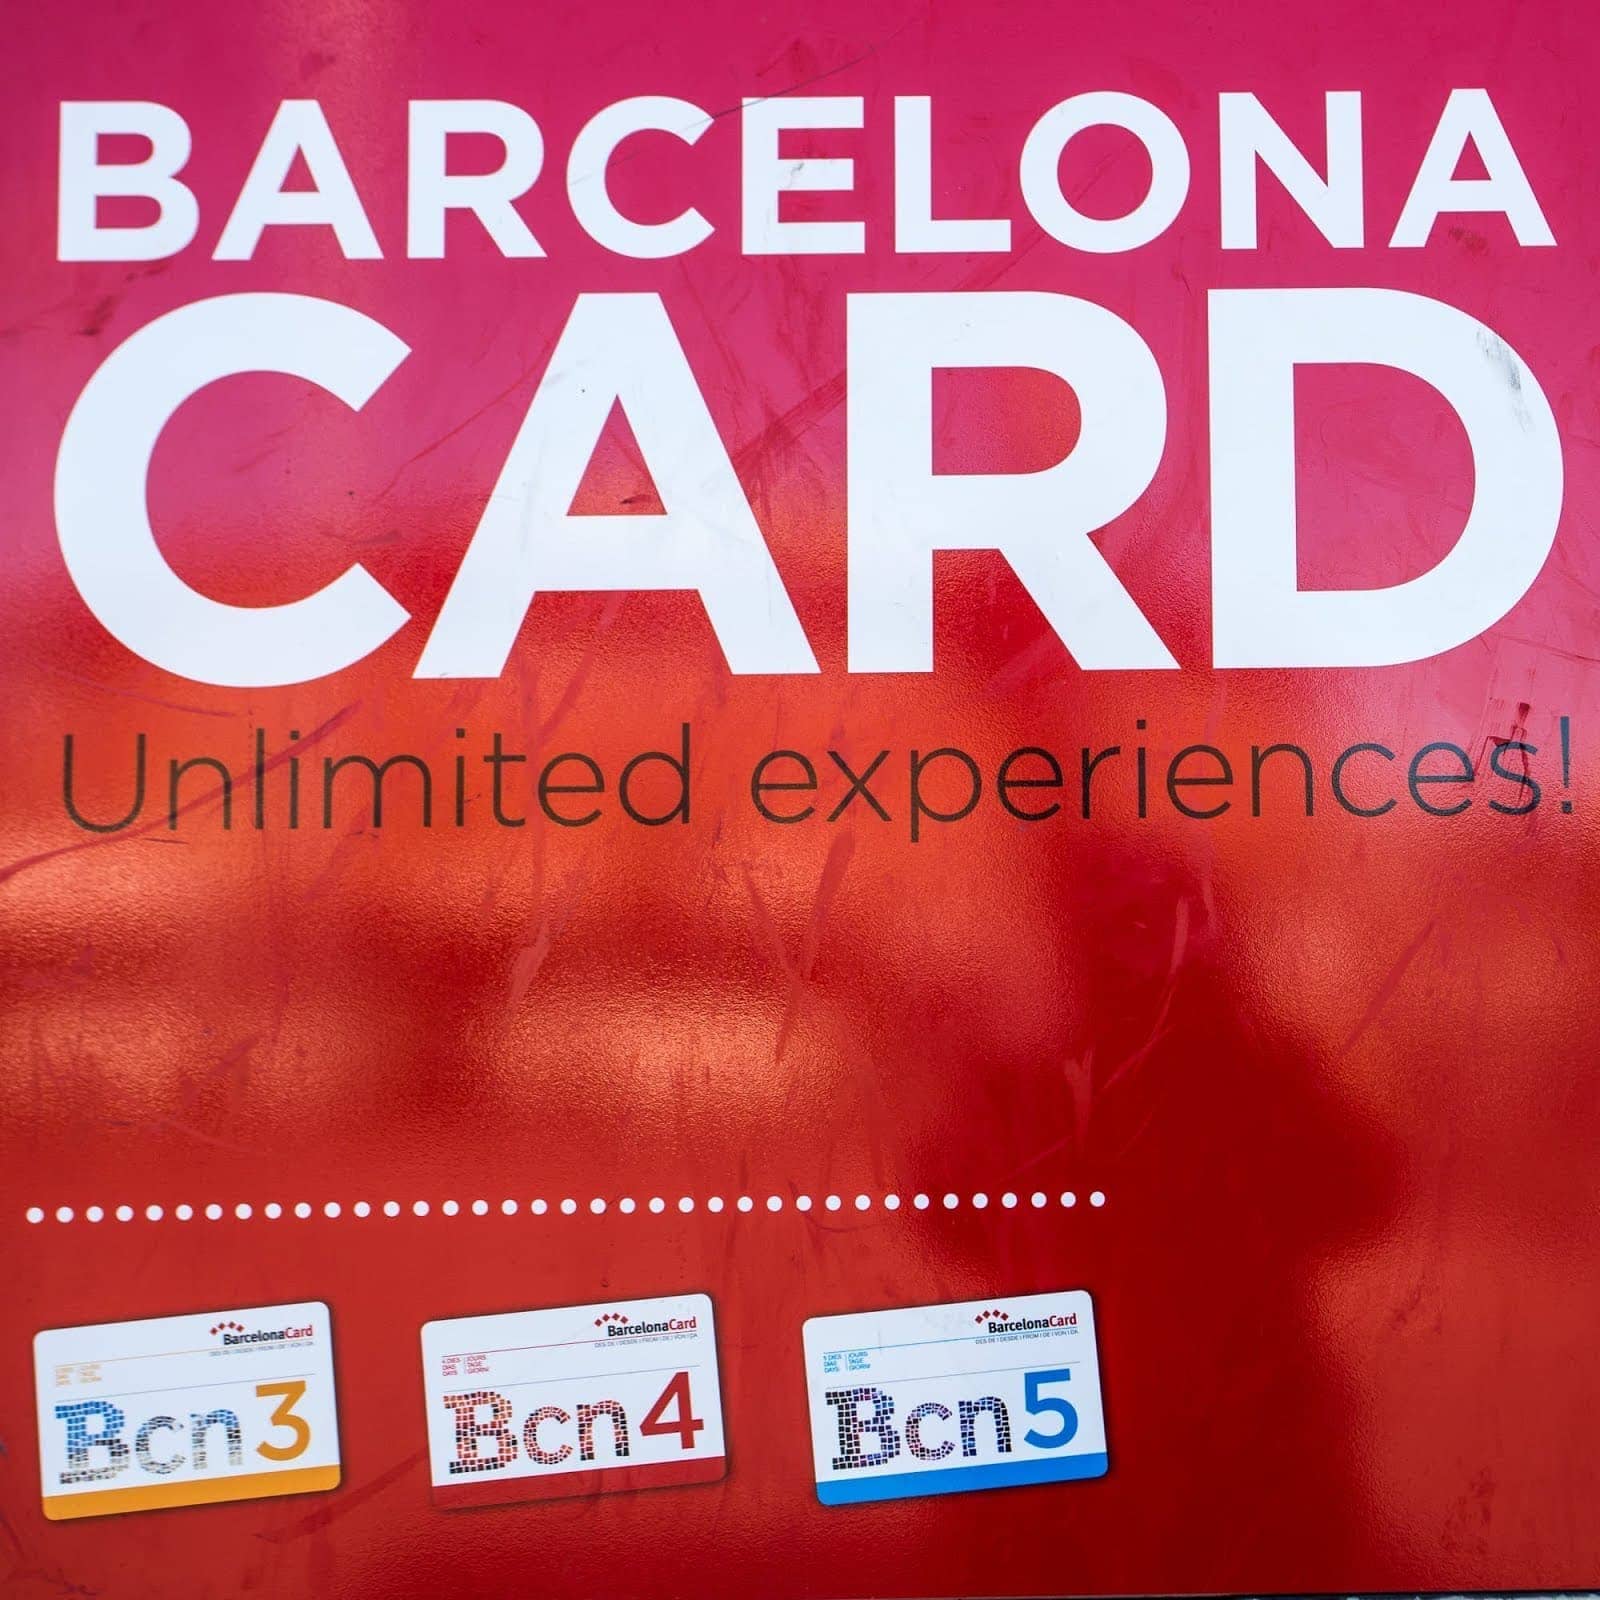 Barcelona Card by Laurence Norah